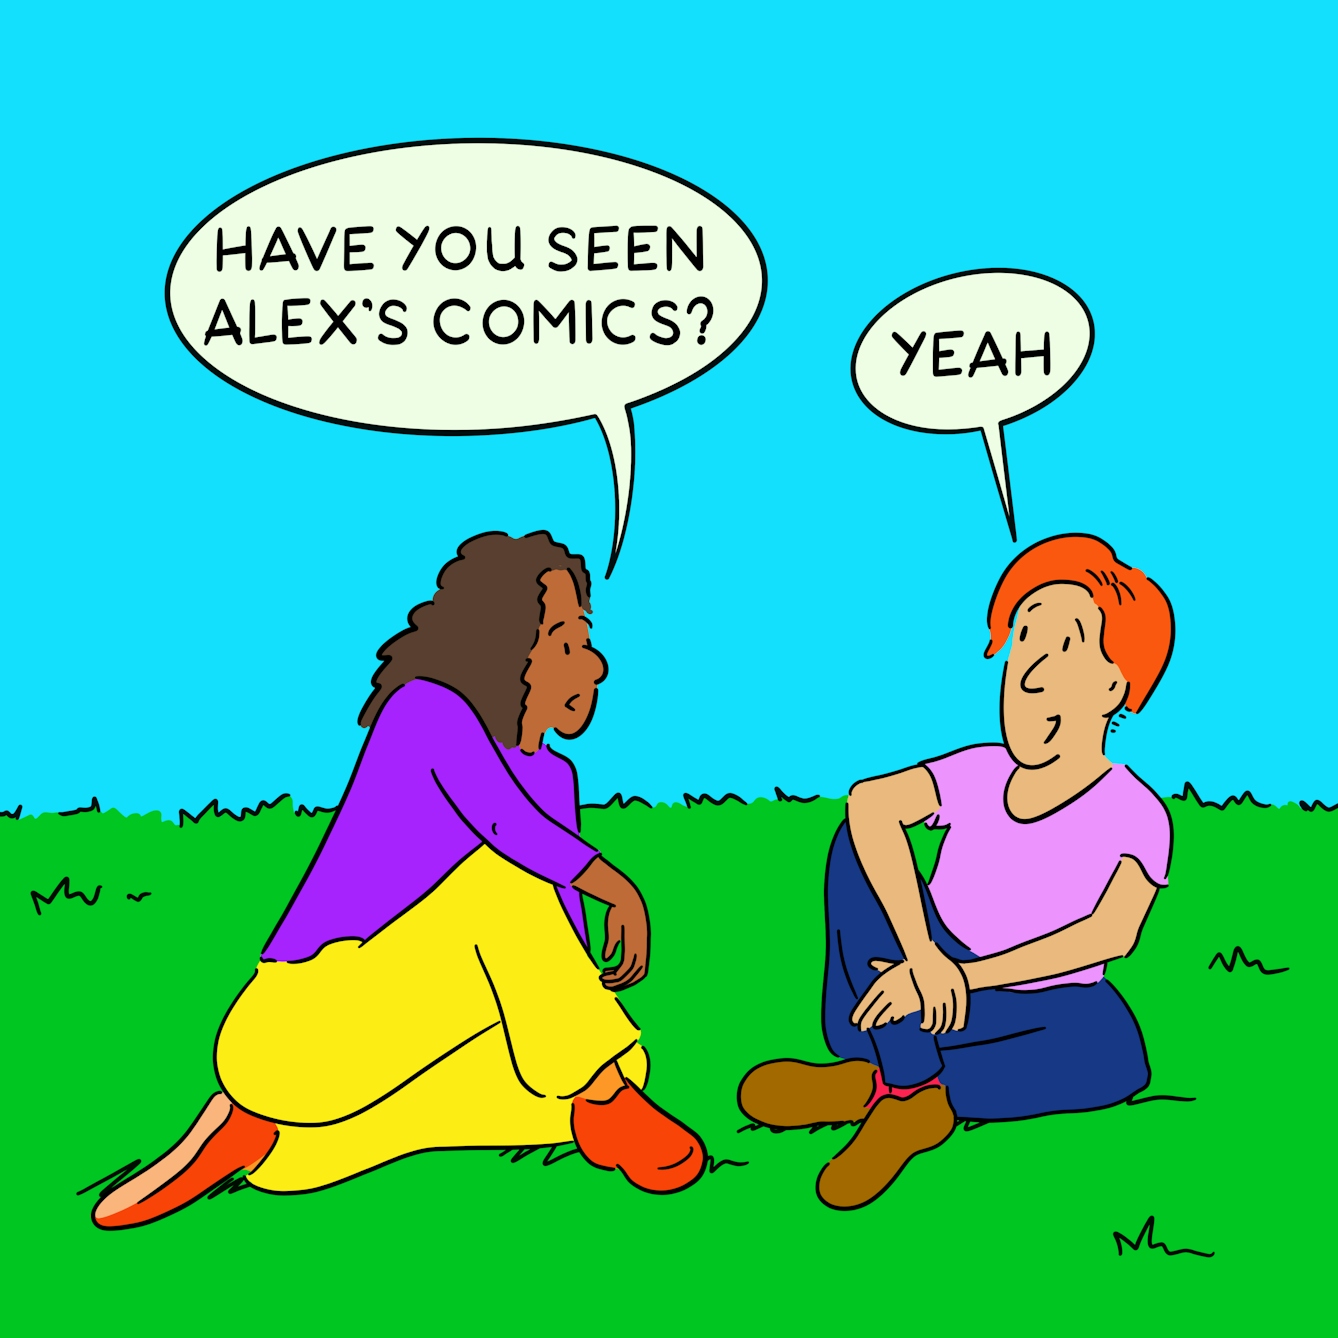 Panel 1 of a four-panel comic drawn digitally: Two people sit on the grass. The one with brown skin, shoulder-length brown hair and a purple shirt asks "Have you seen Alex's Comics?" and the other with white skin, short red hair and a pink t-shirt replies "Yeah".